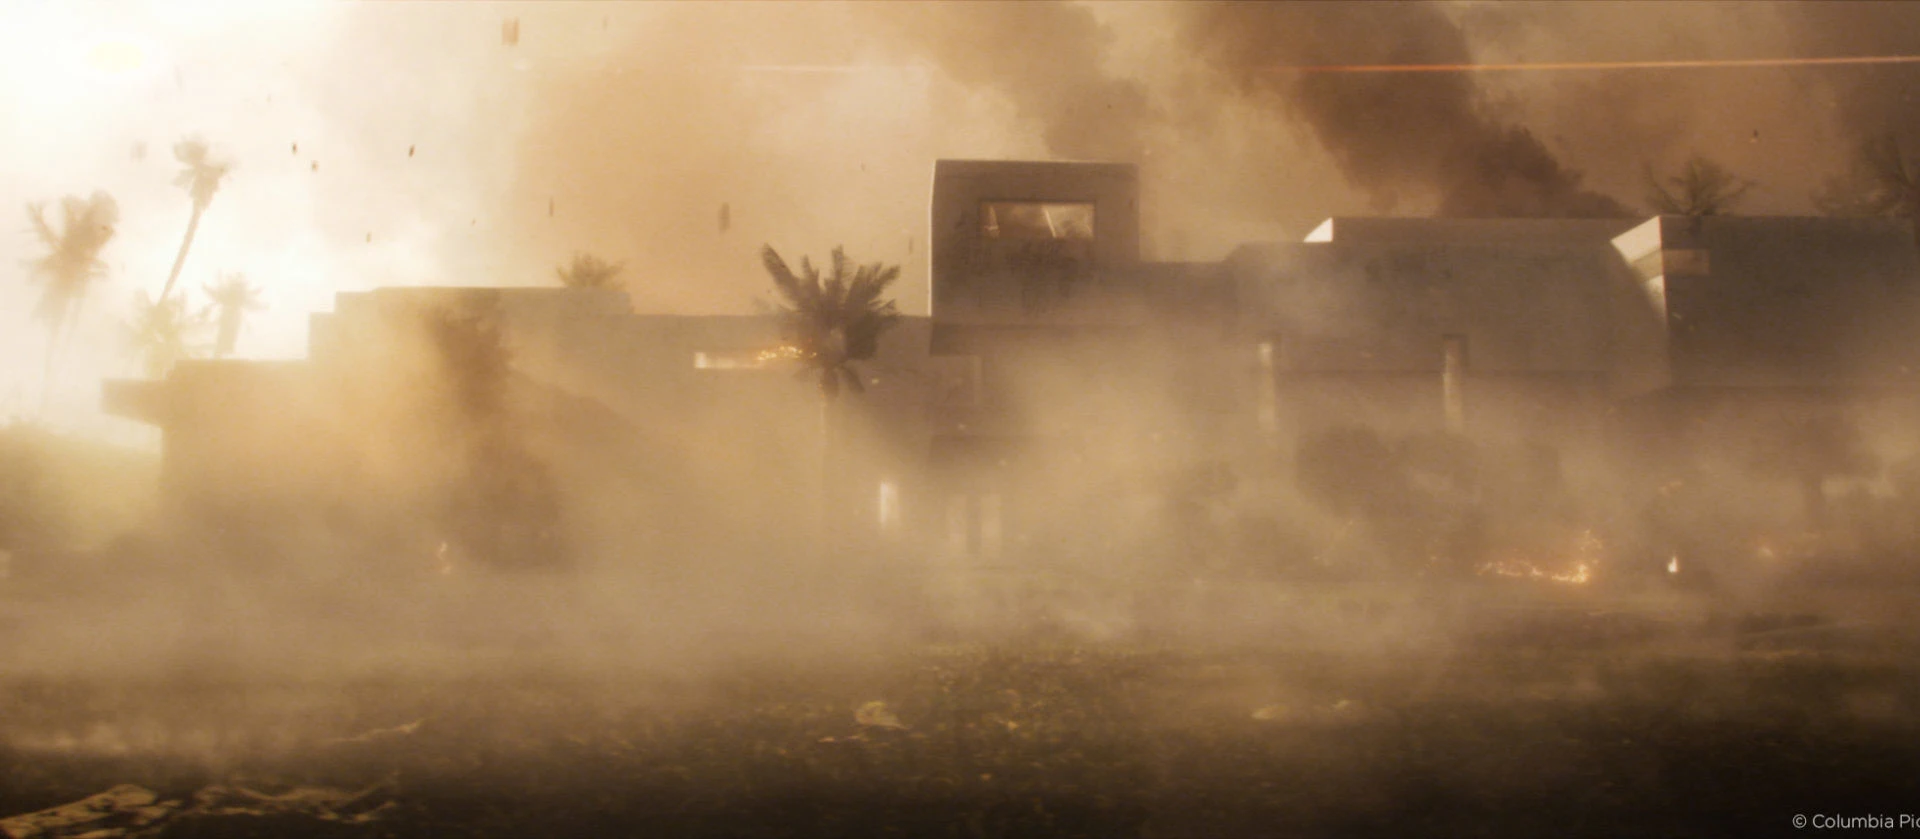 House in apocalyptic smog in This is the end Raynaut vfx